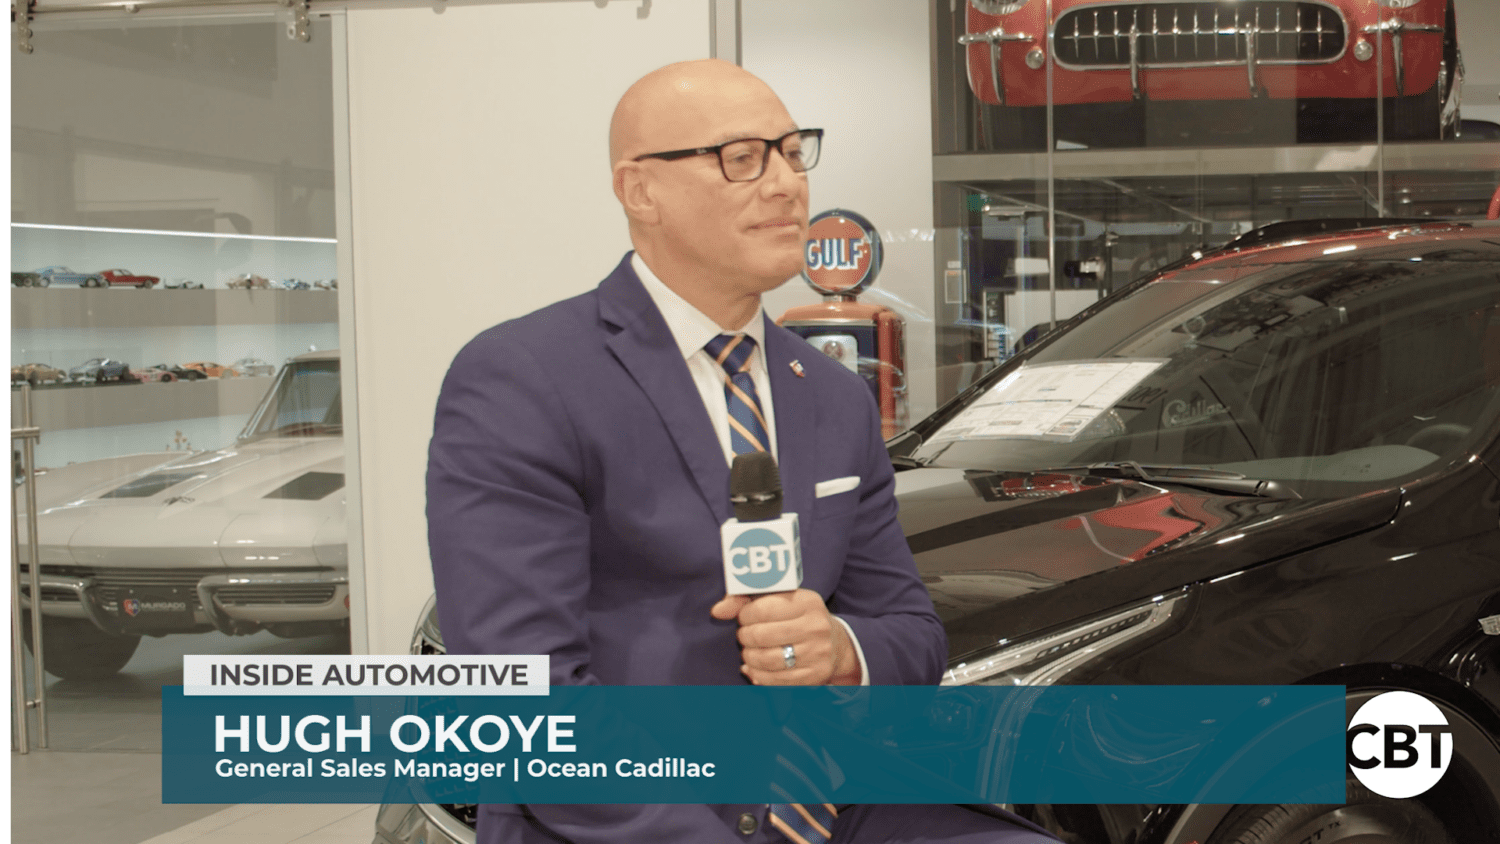 Hugh Okoye joins Inside Automotive to discuss his own professional journey and the benefits of choosing a career in automotive sales.